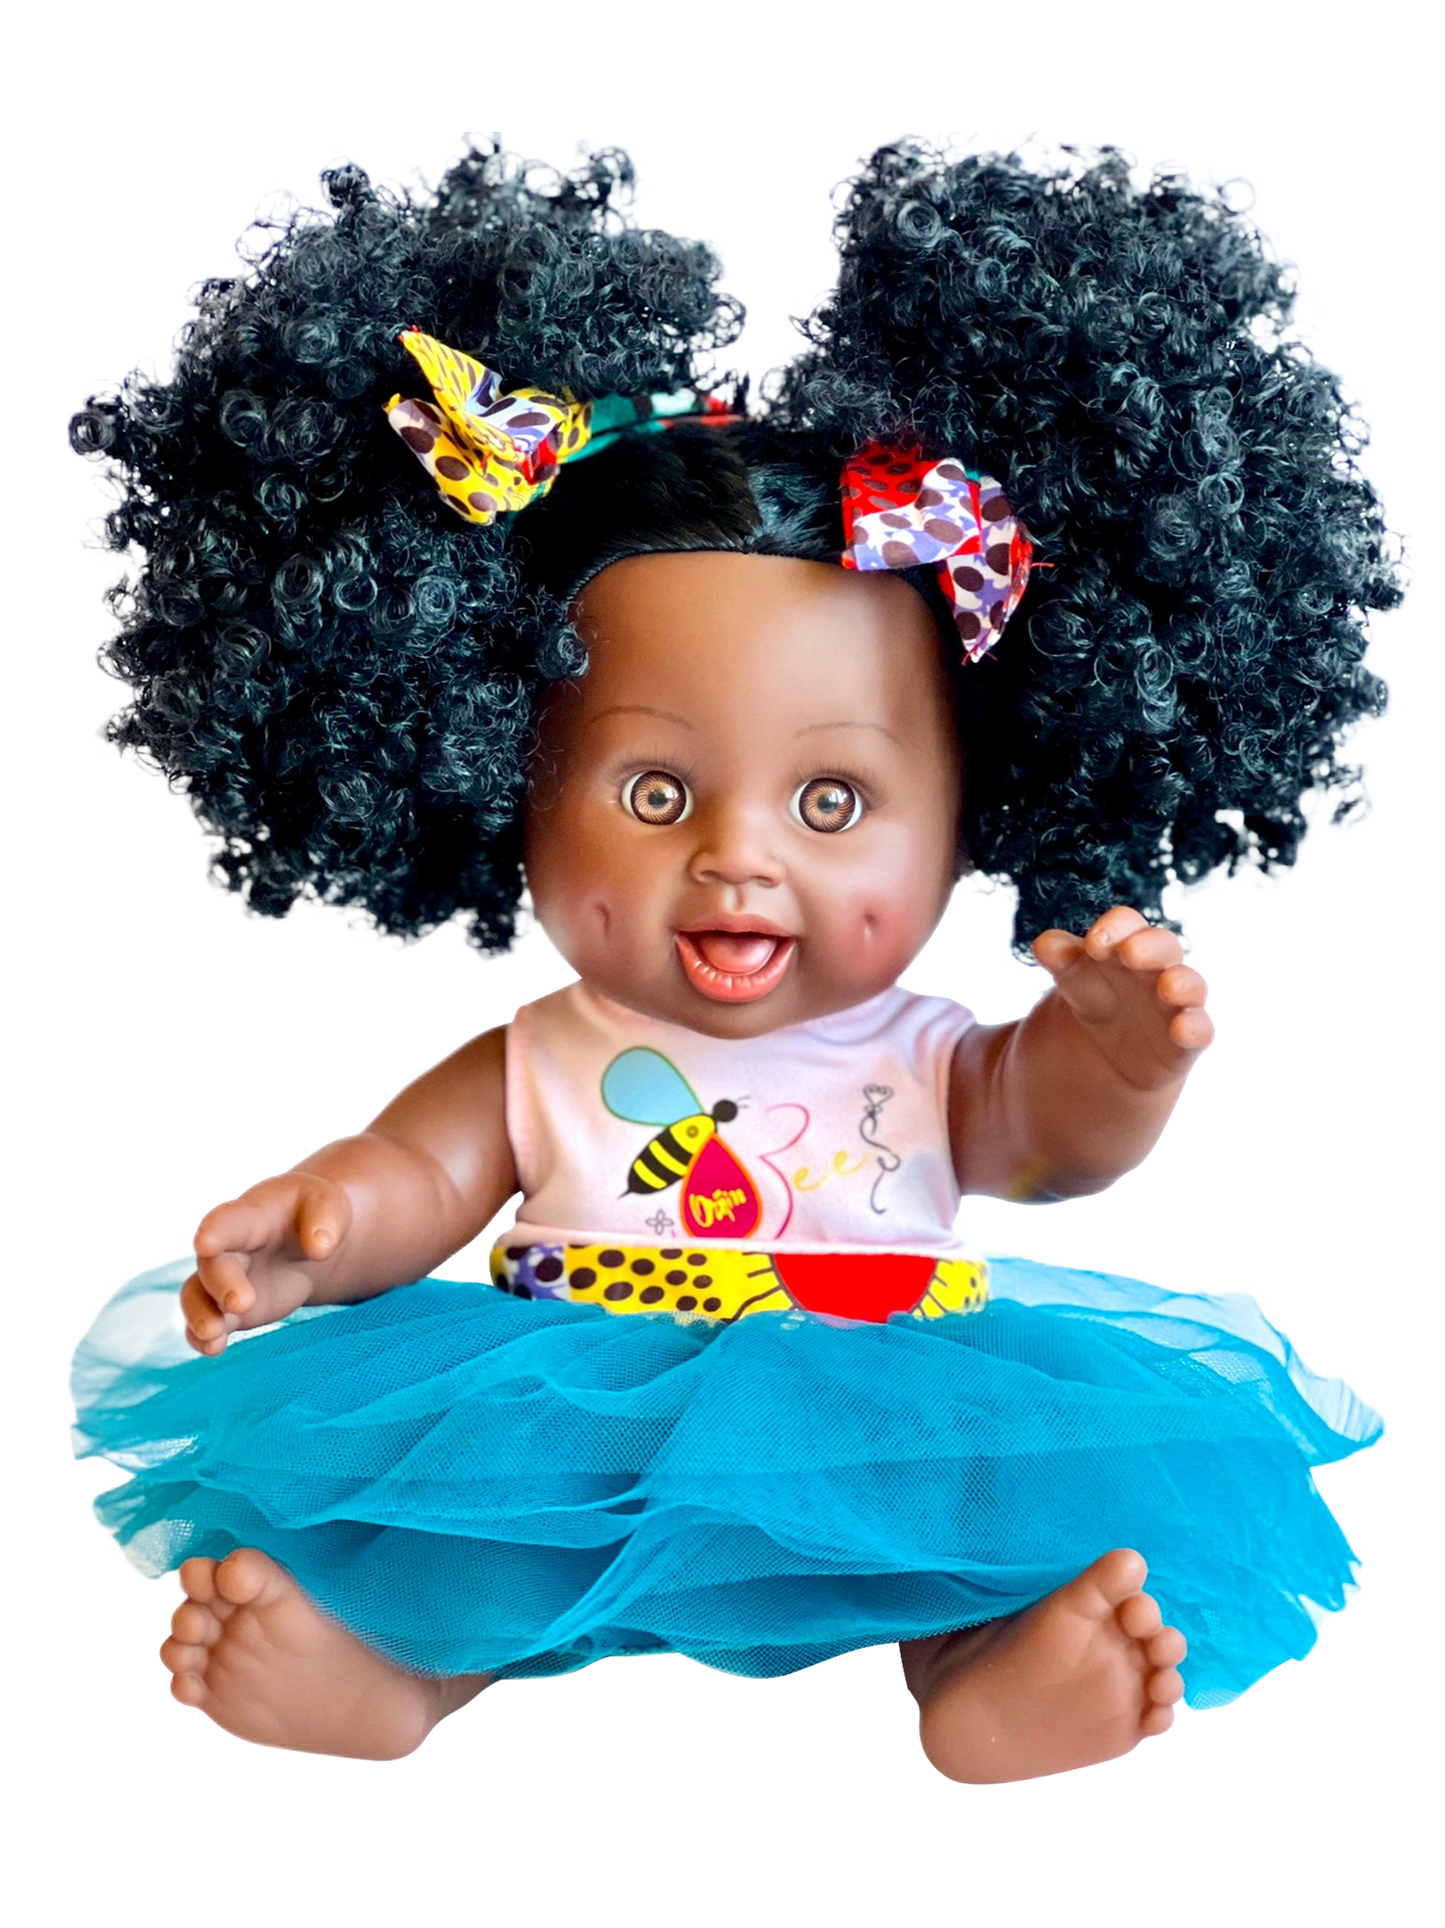 Fro Puffy Bee Baby Doll